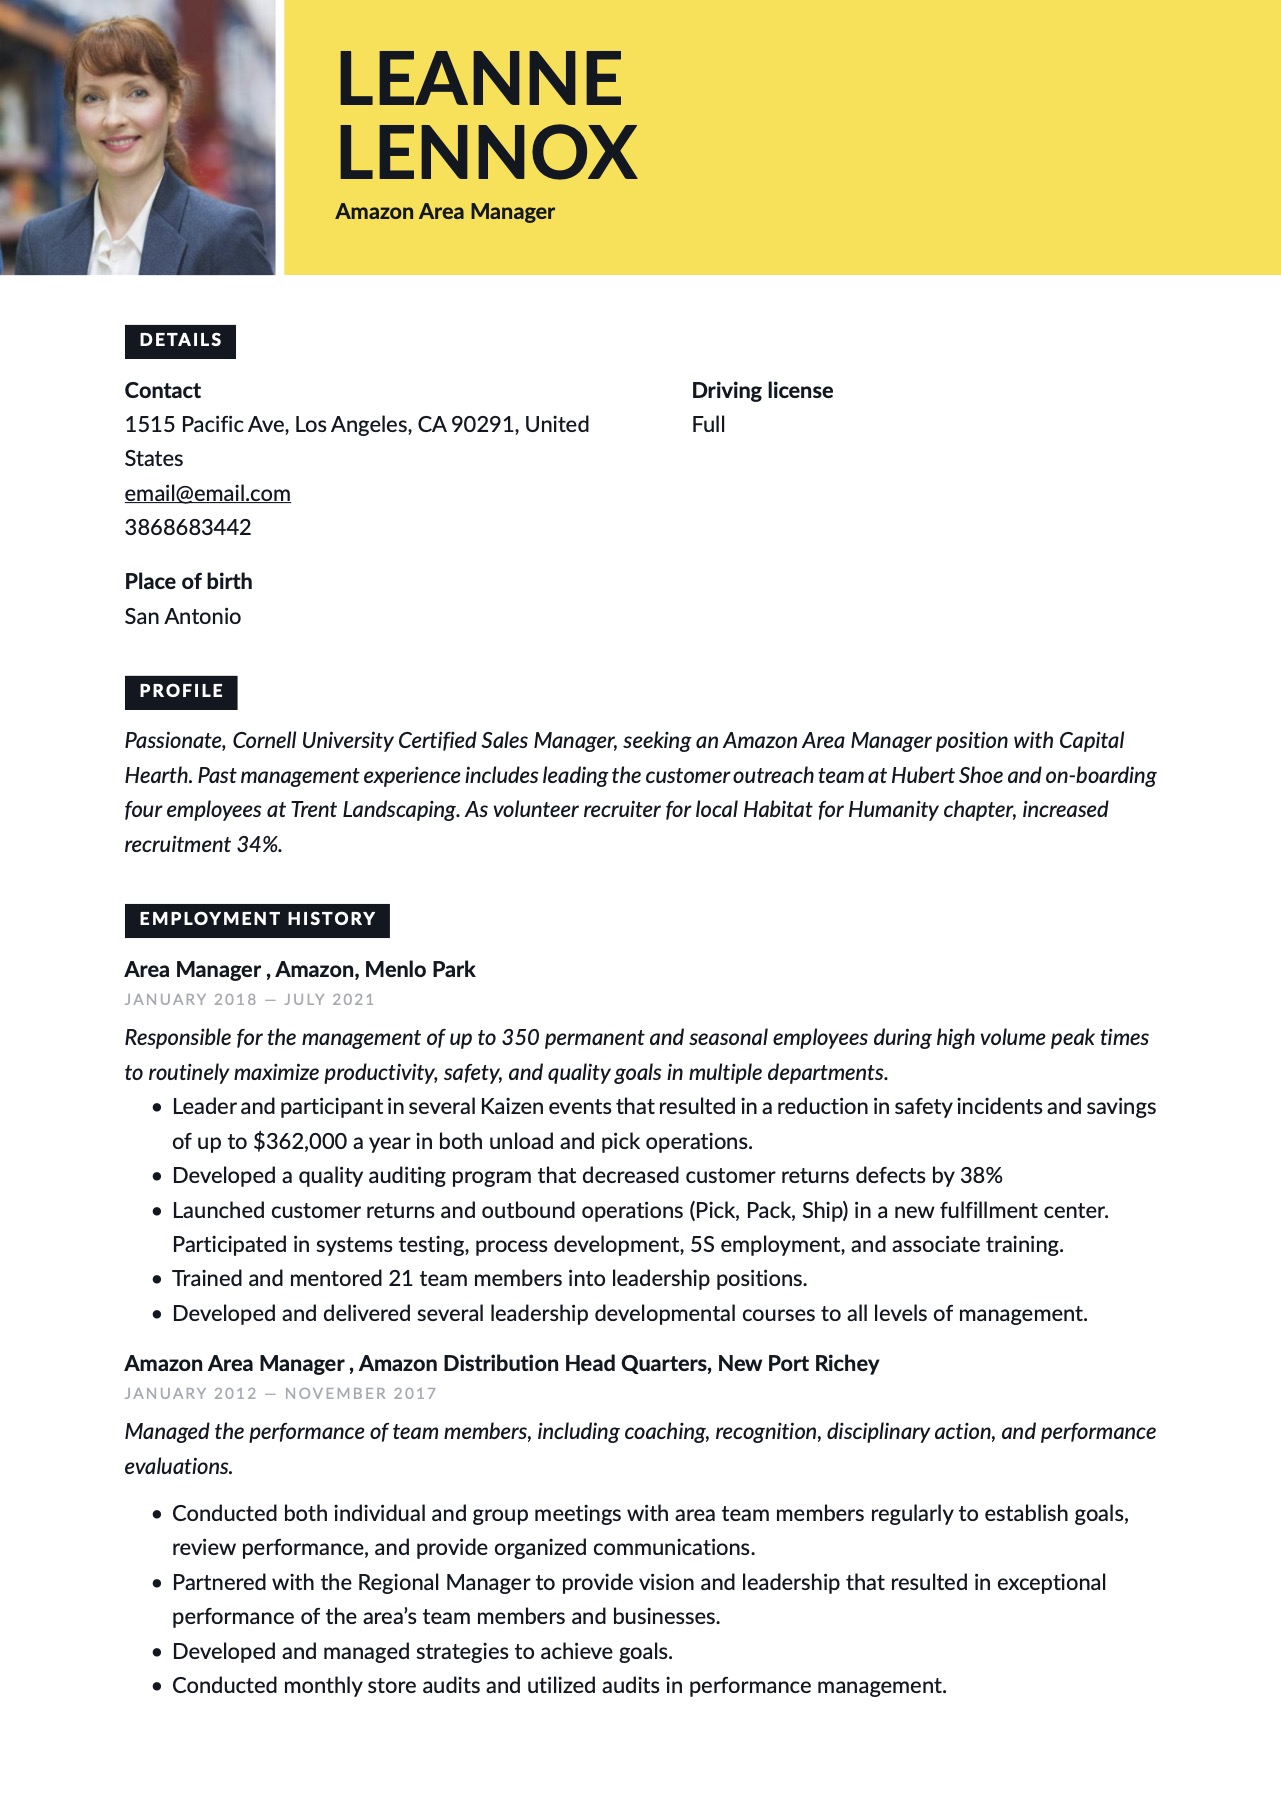 Creative Amazon Area Manager Resume Yellow Template